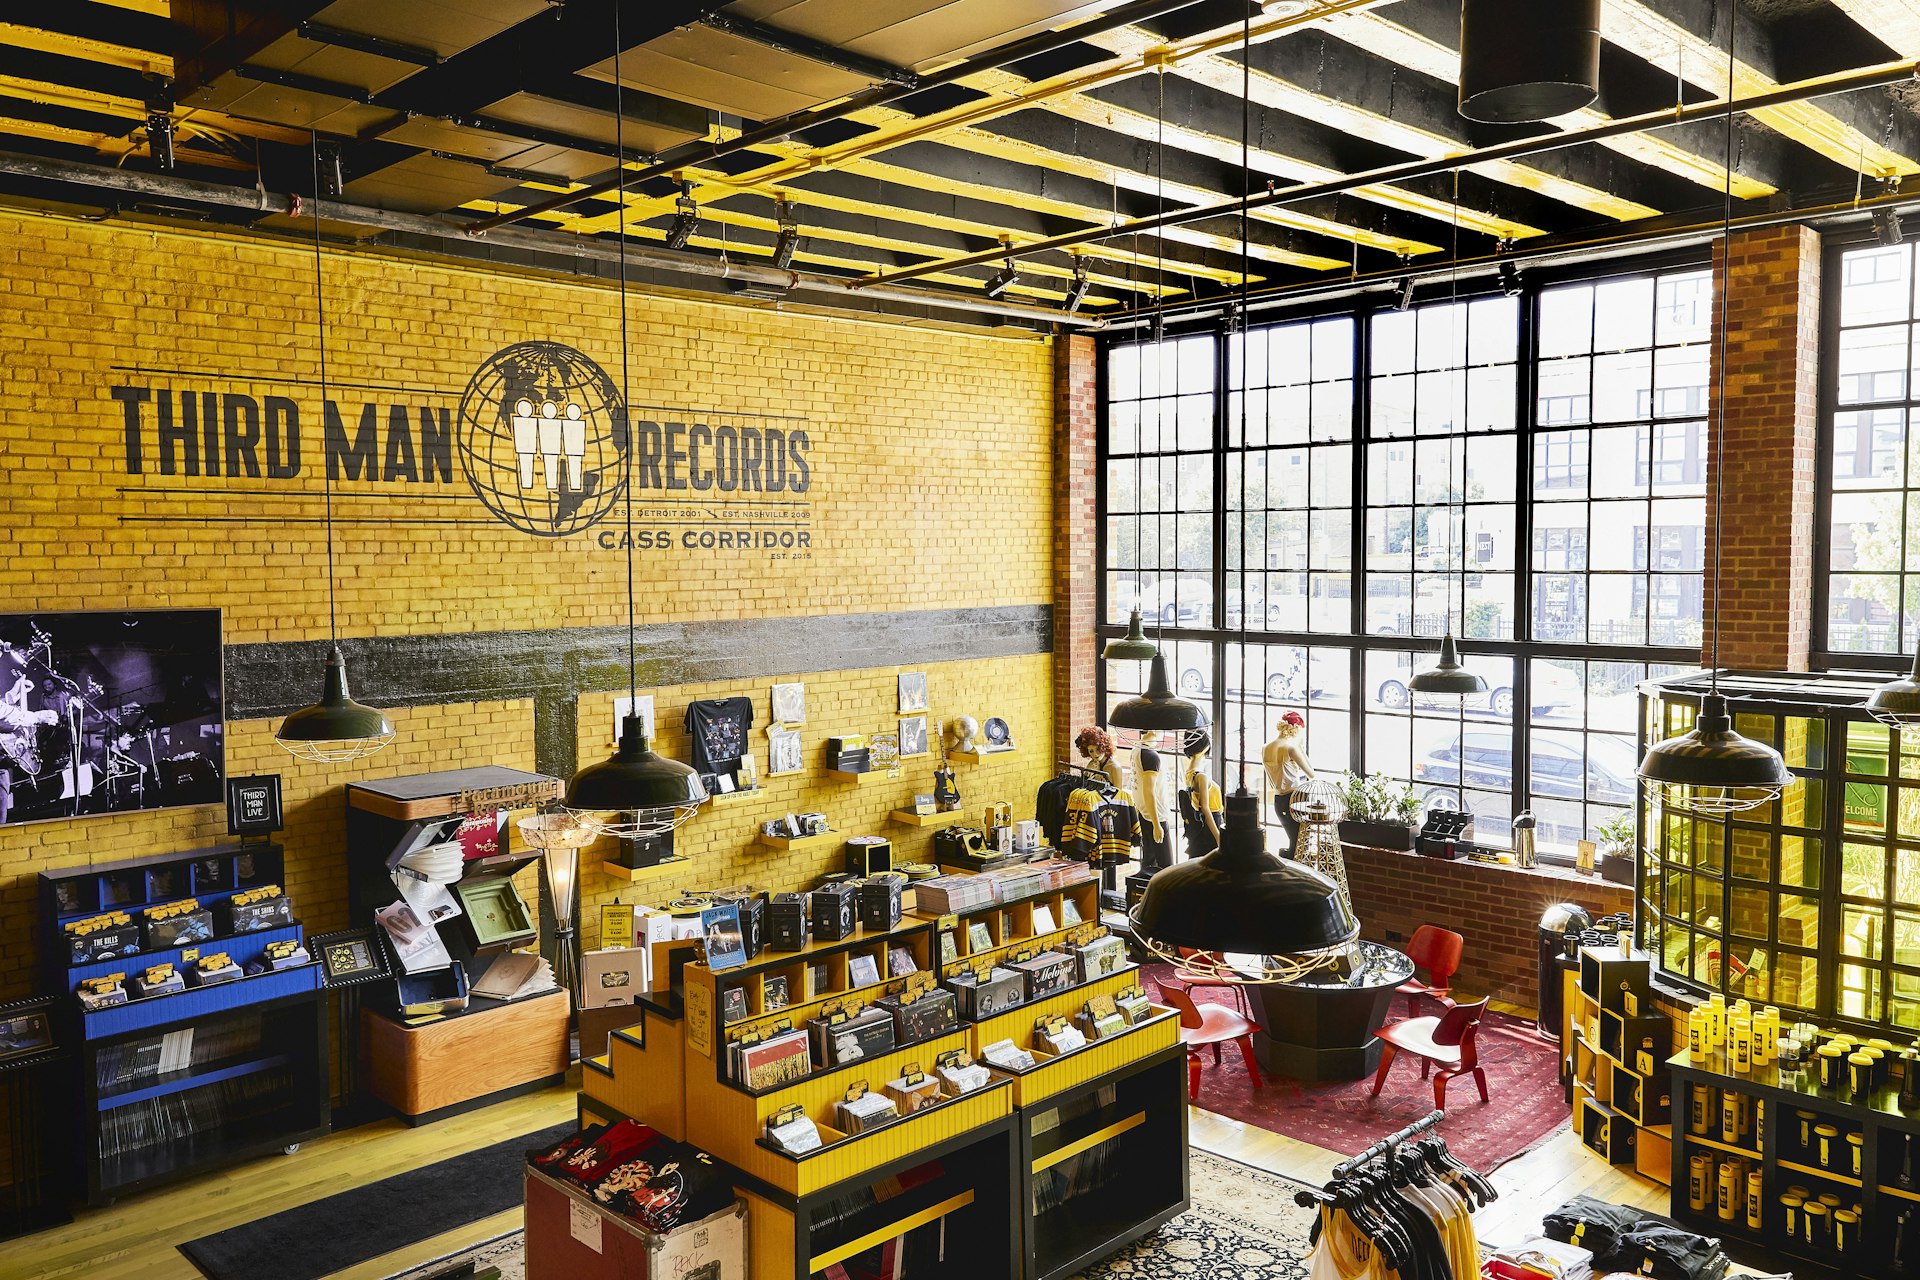 Third Man Records occupies a former factory in Midtown 